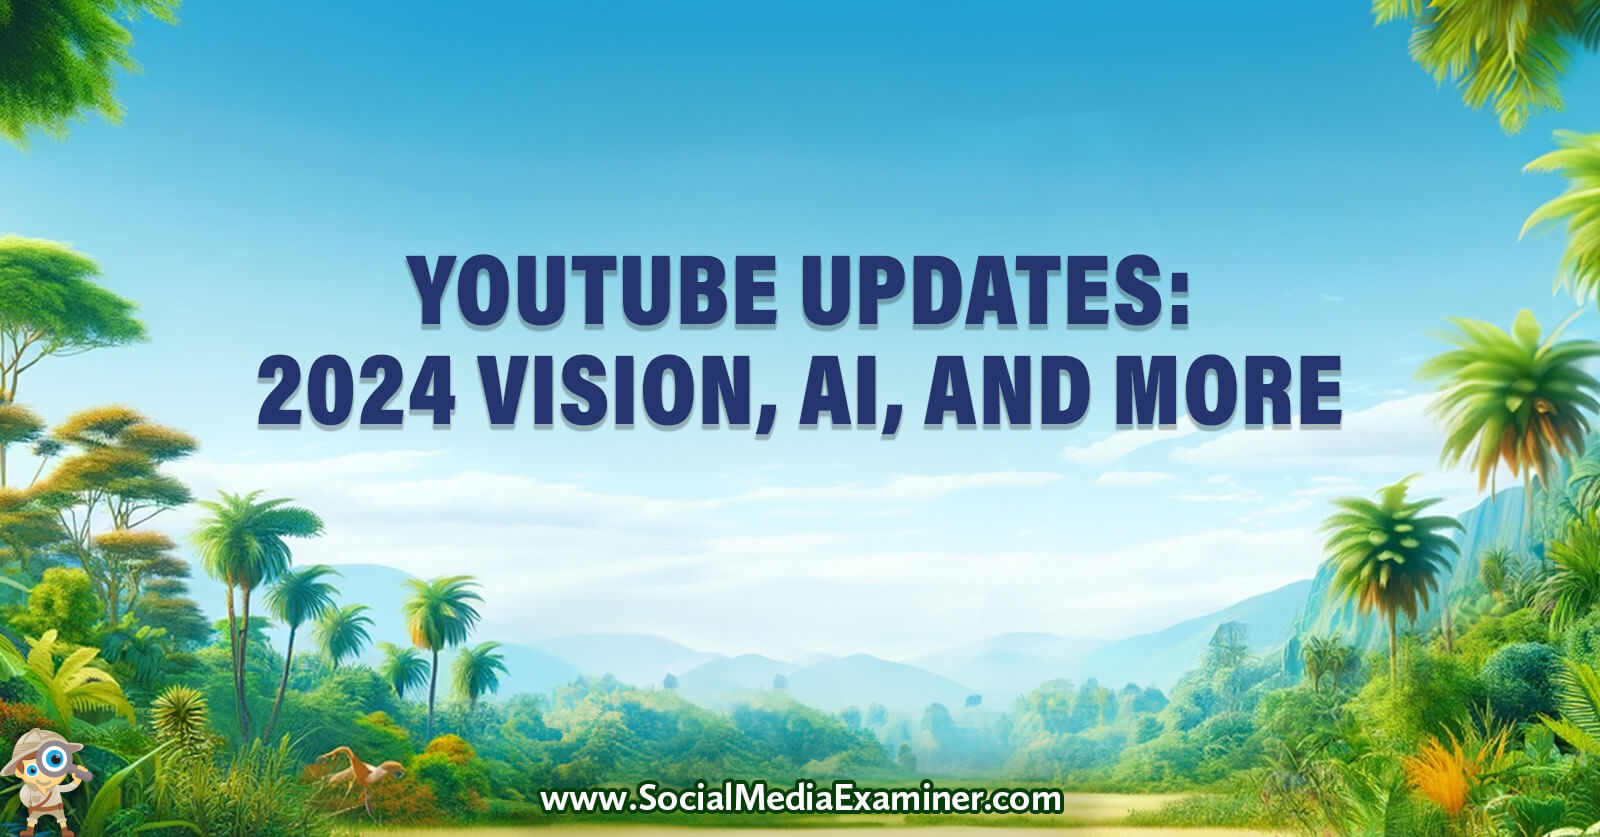 YouTube Updates: YouTube’s 2024 Vision for AI, YPP, Experience Features, and More by Social Media Examiner